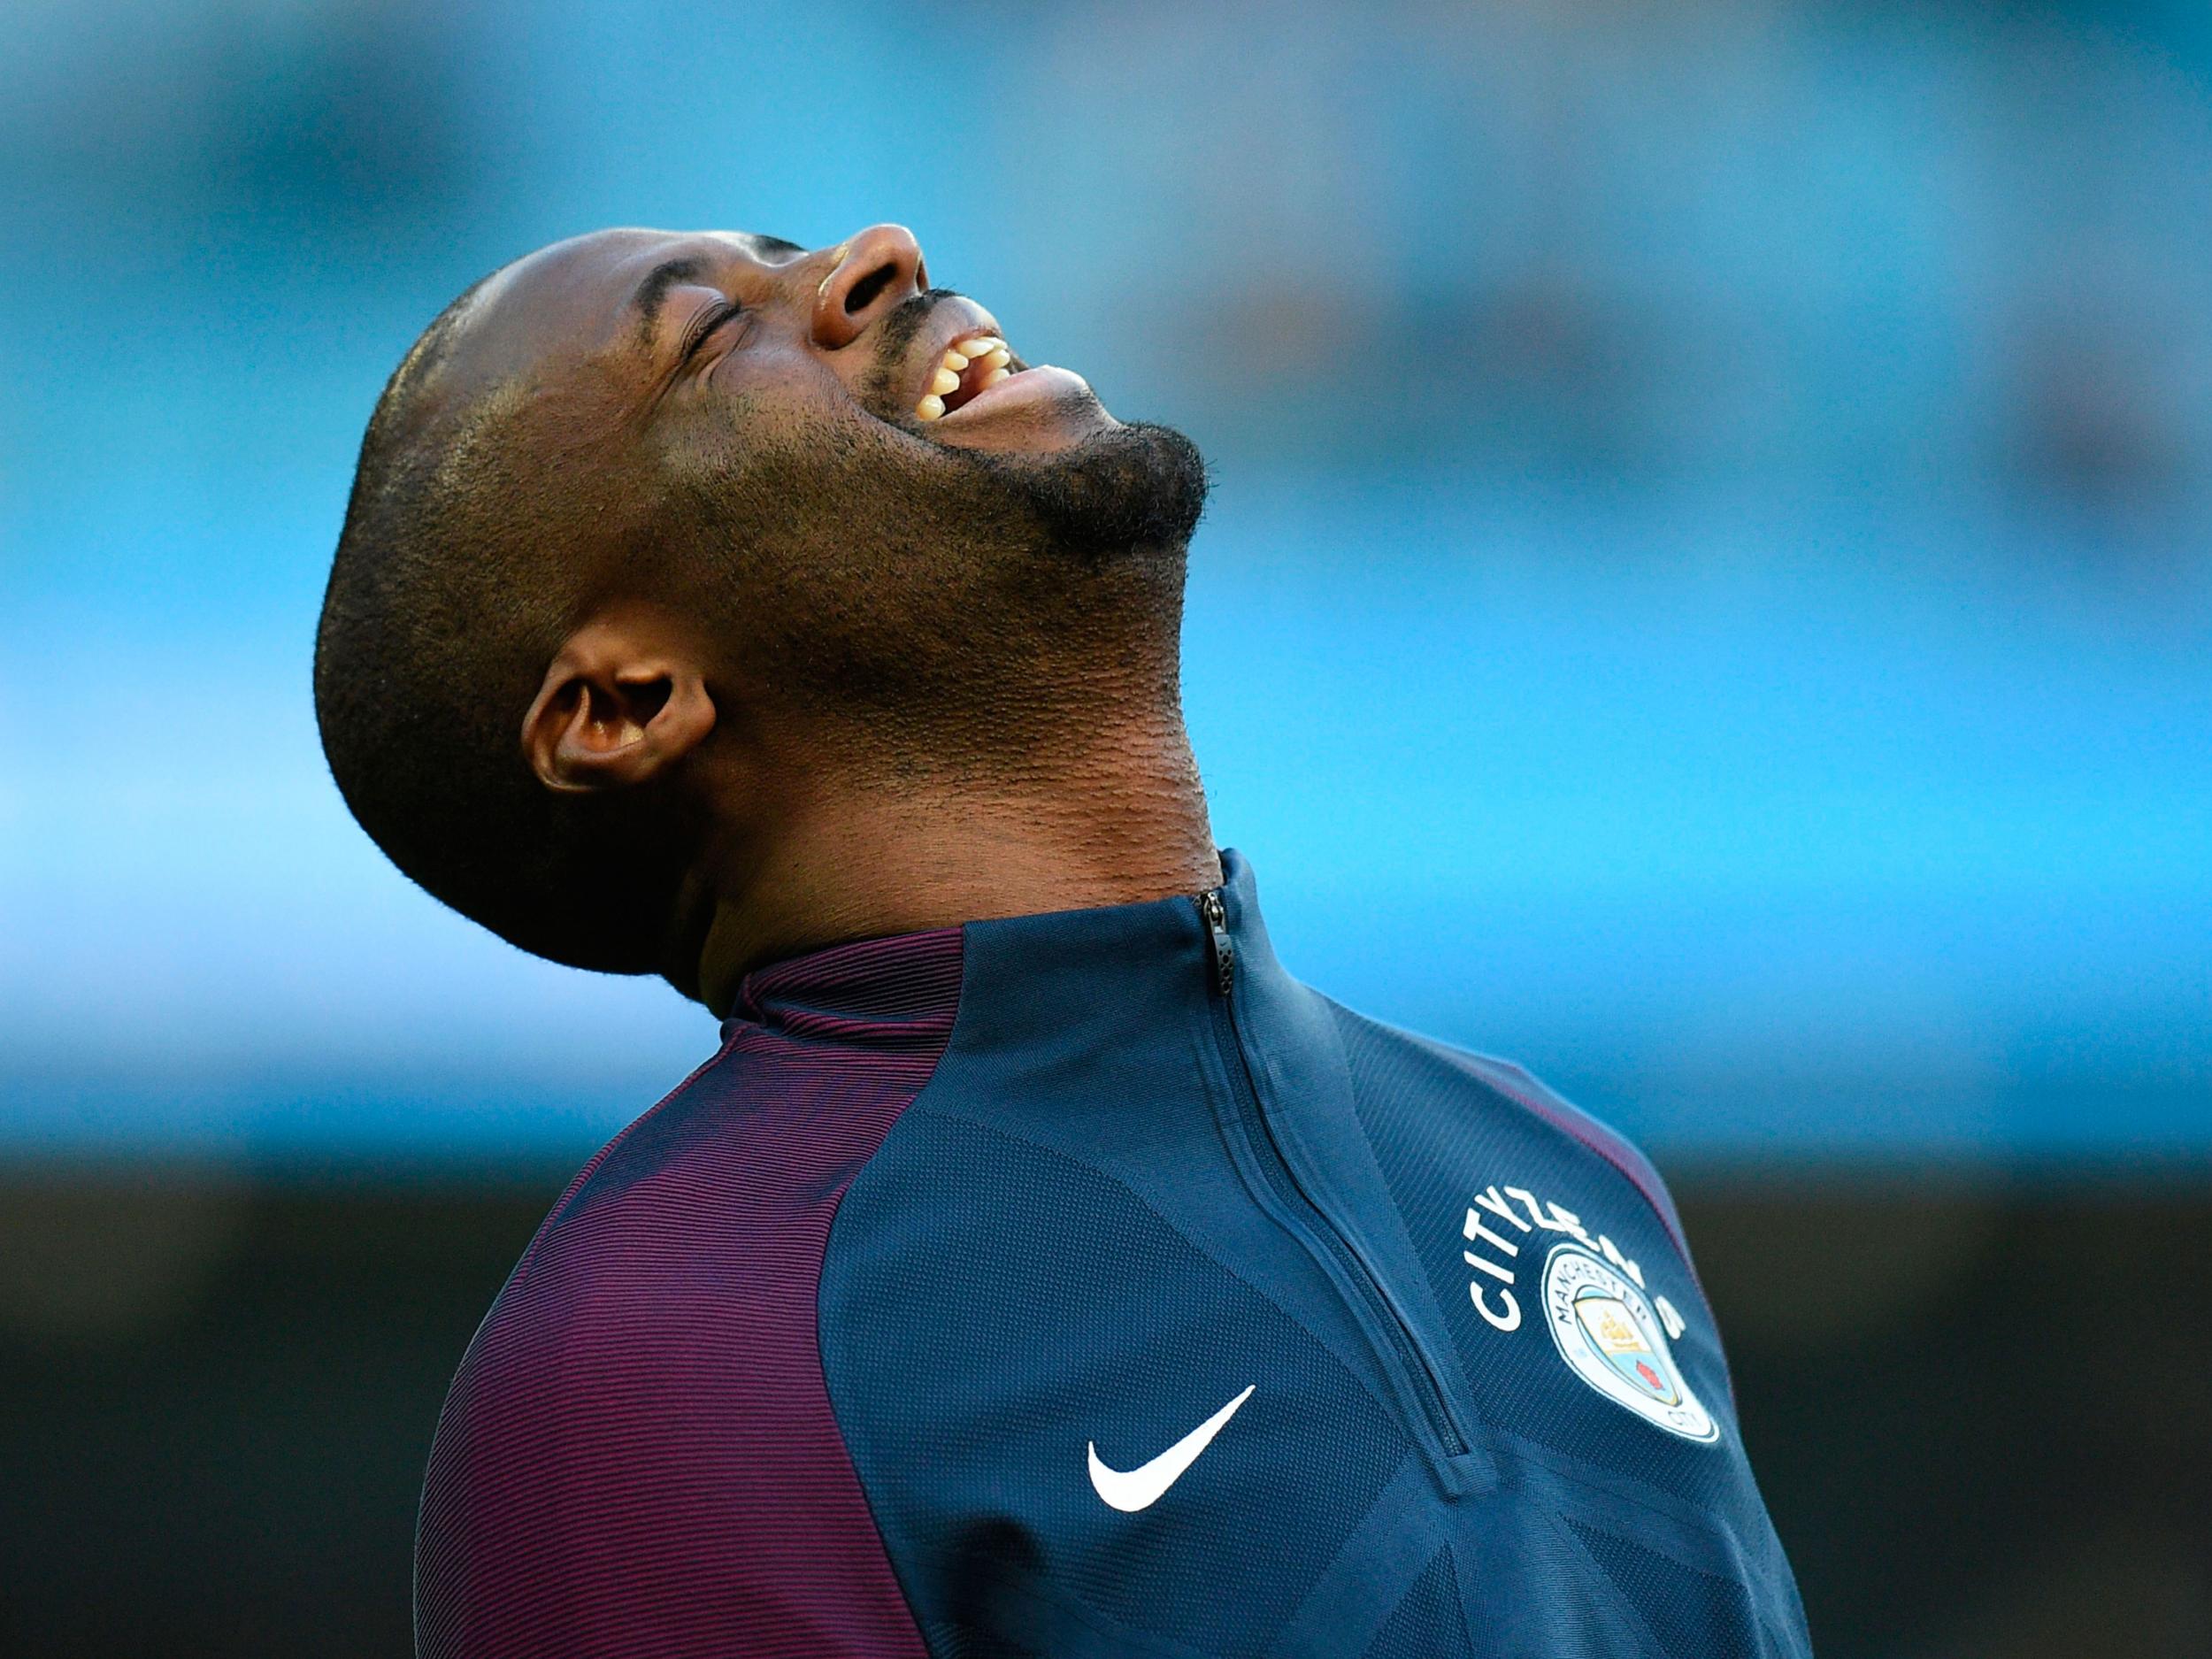 Yaya Touré has only featured intermittently for Manchester City this season